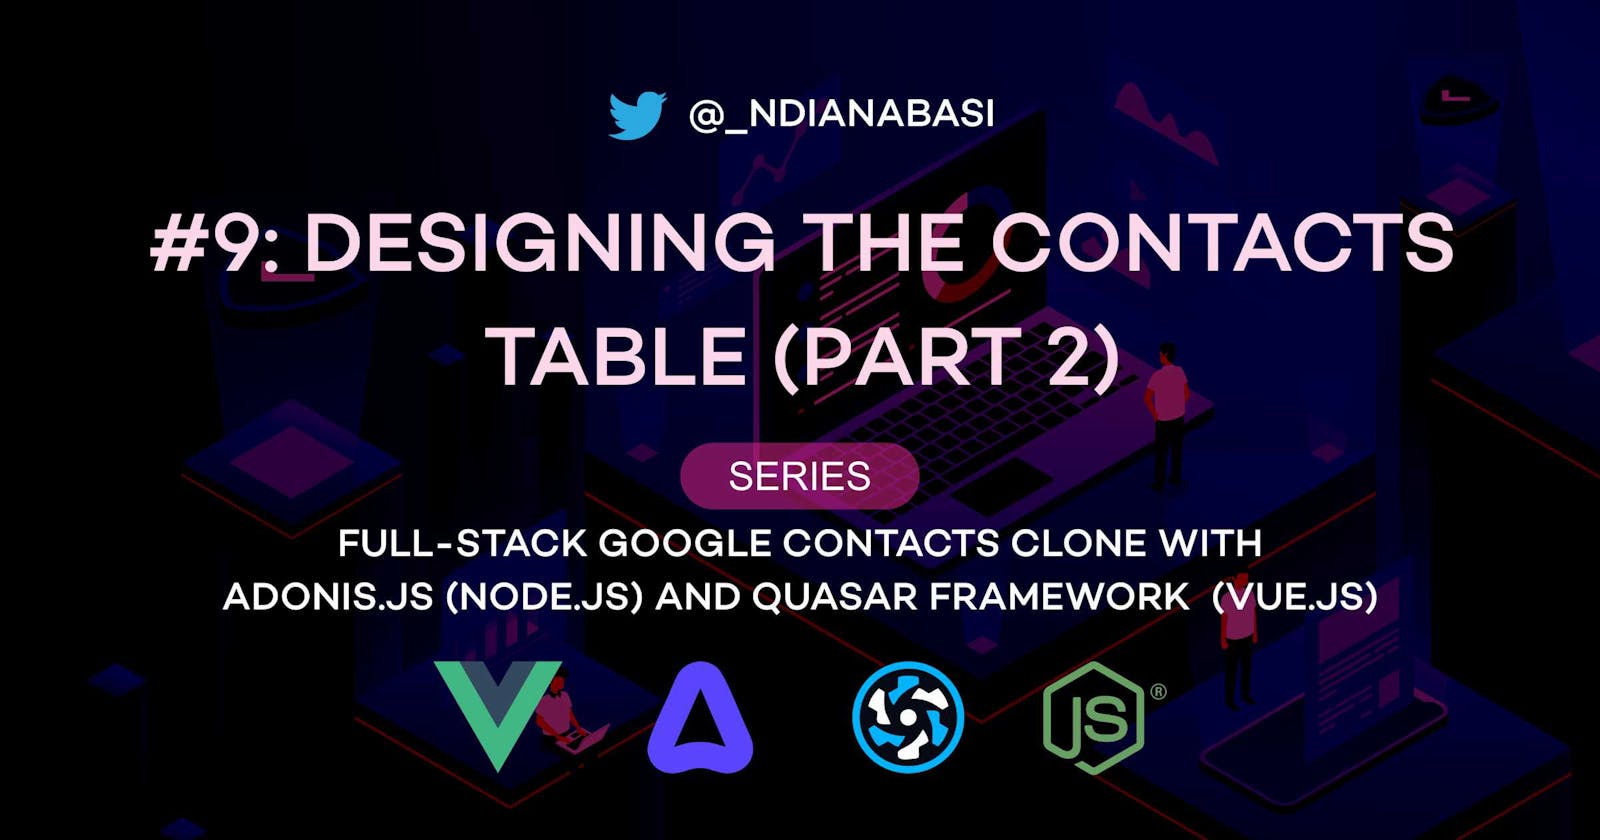 Designing the Contacts Table (Part 2) | Full-Stack Google Contacts Clone with Adonis.js/Node.js and Quasar (Vue.js)